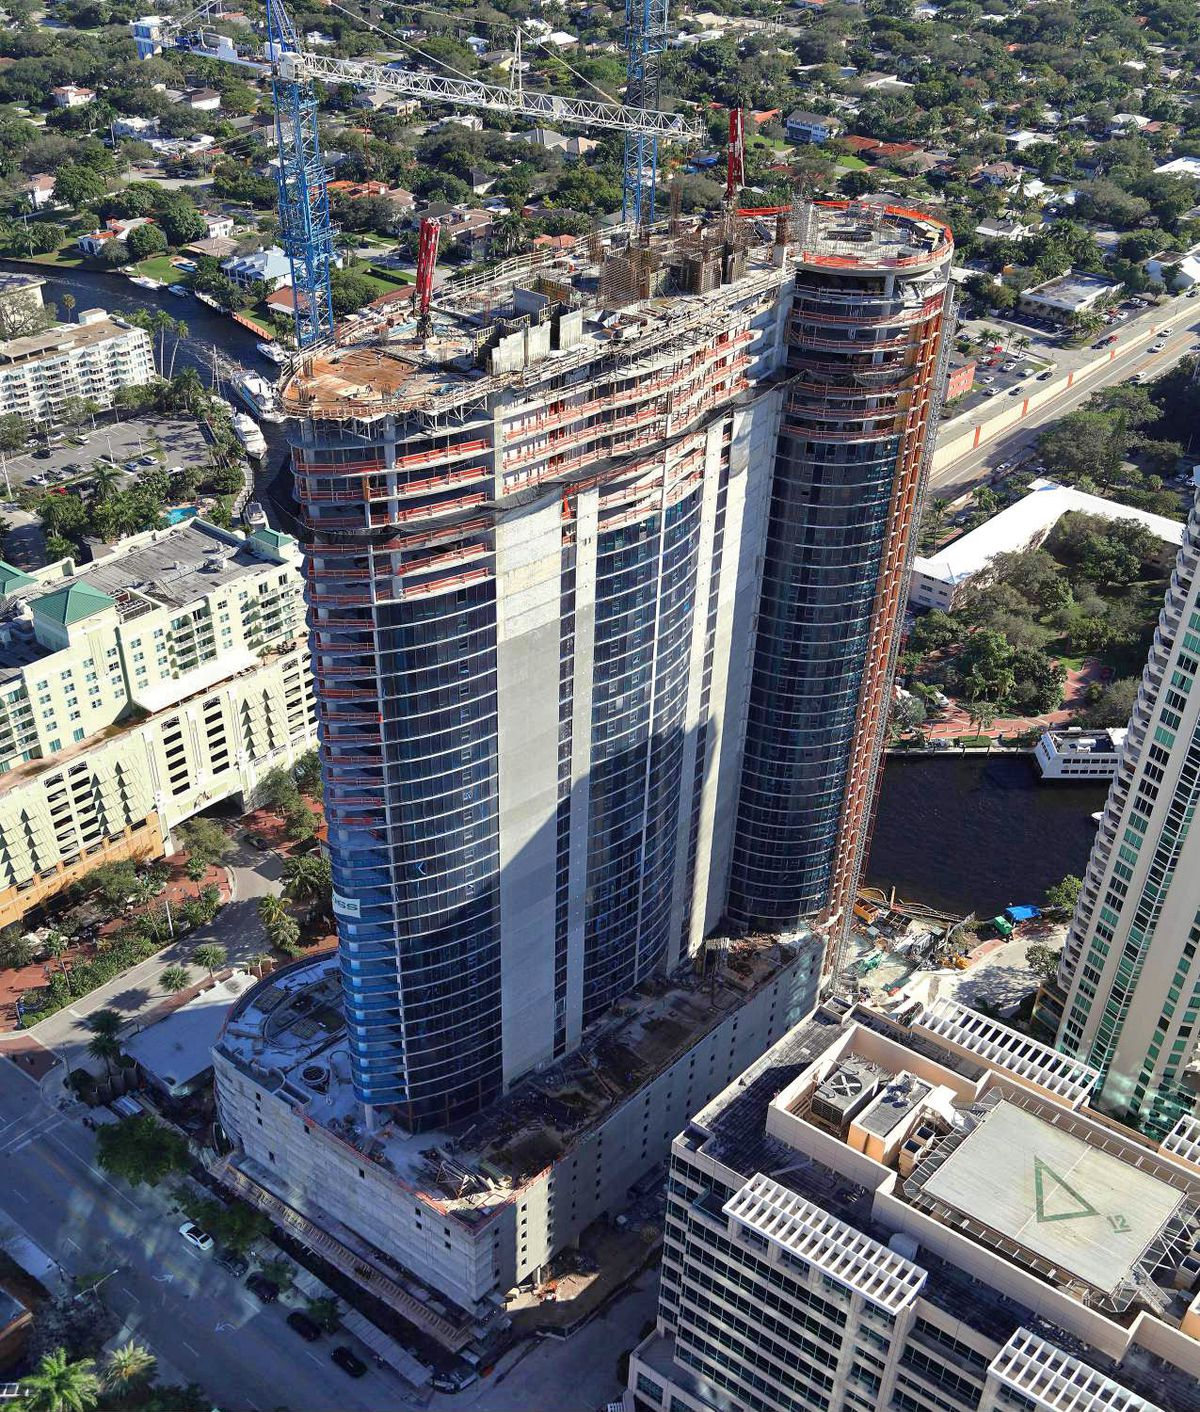 View of a 45-story tower in Fort Lauderdale